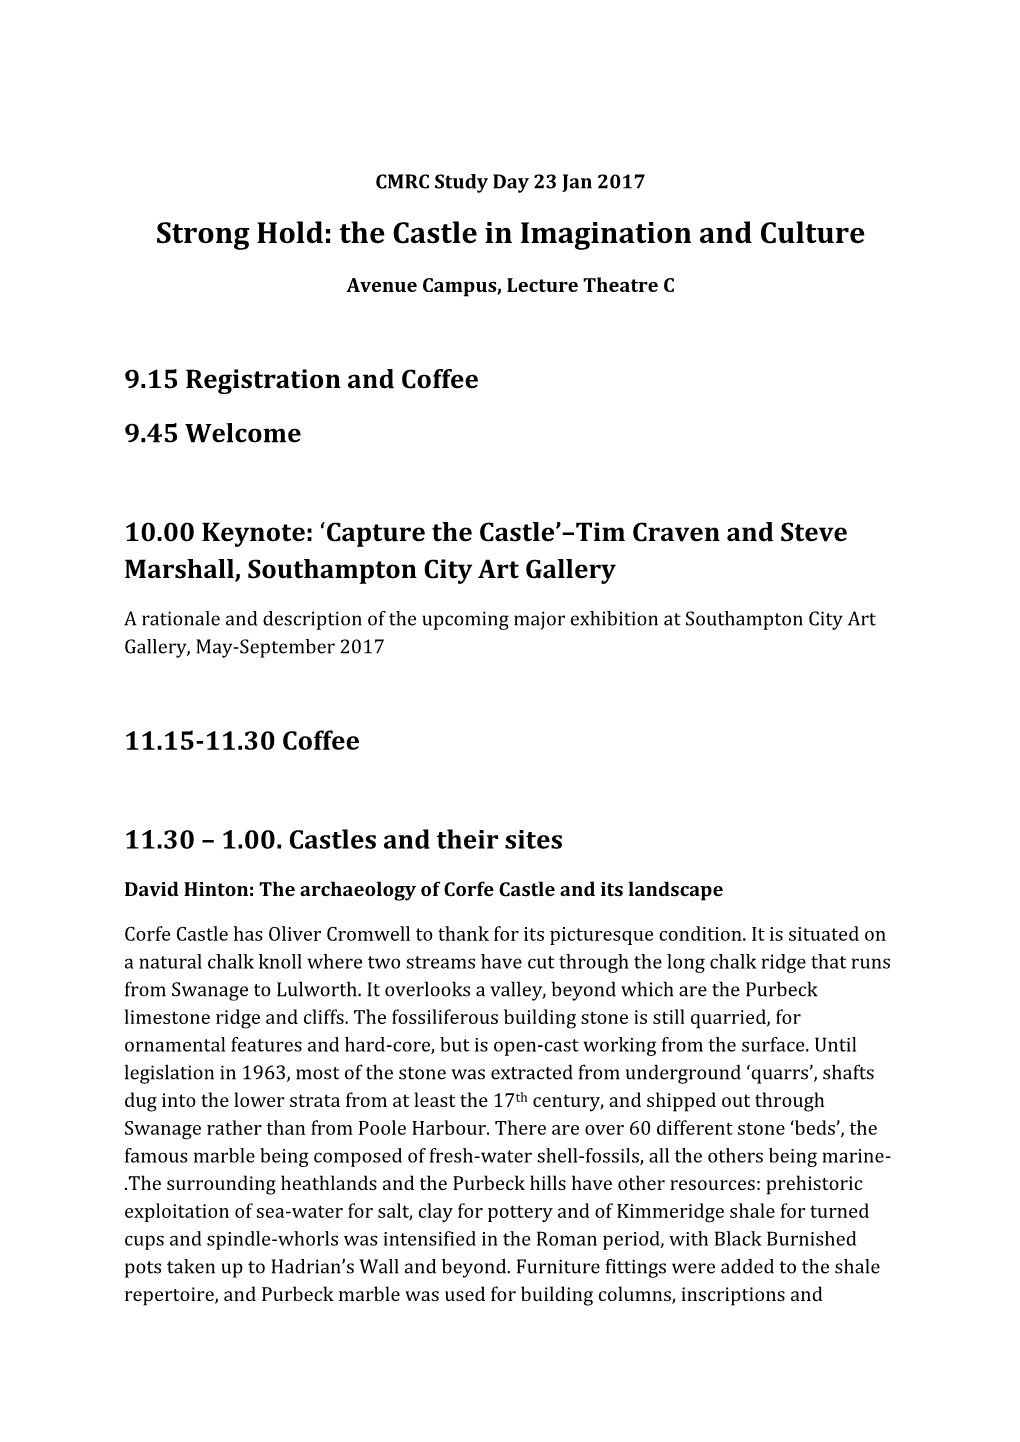 Strong Hold: the Castle in Imagination and Culture